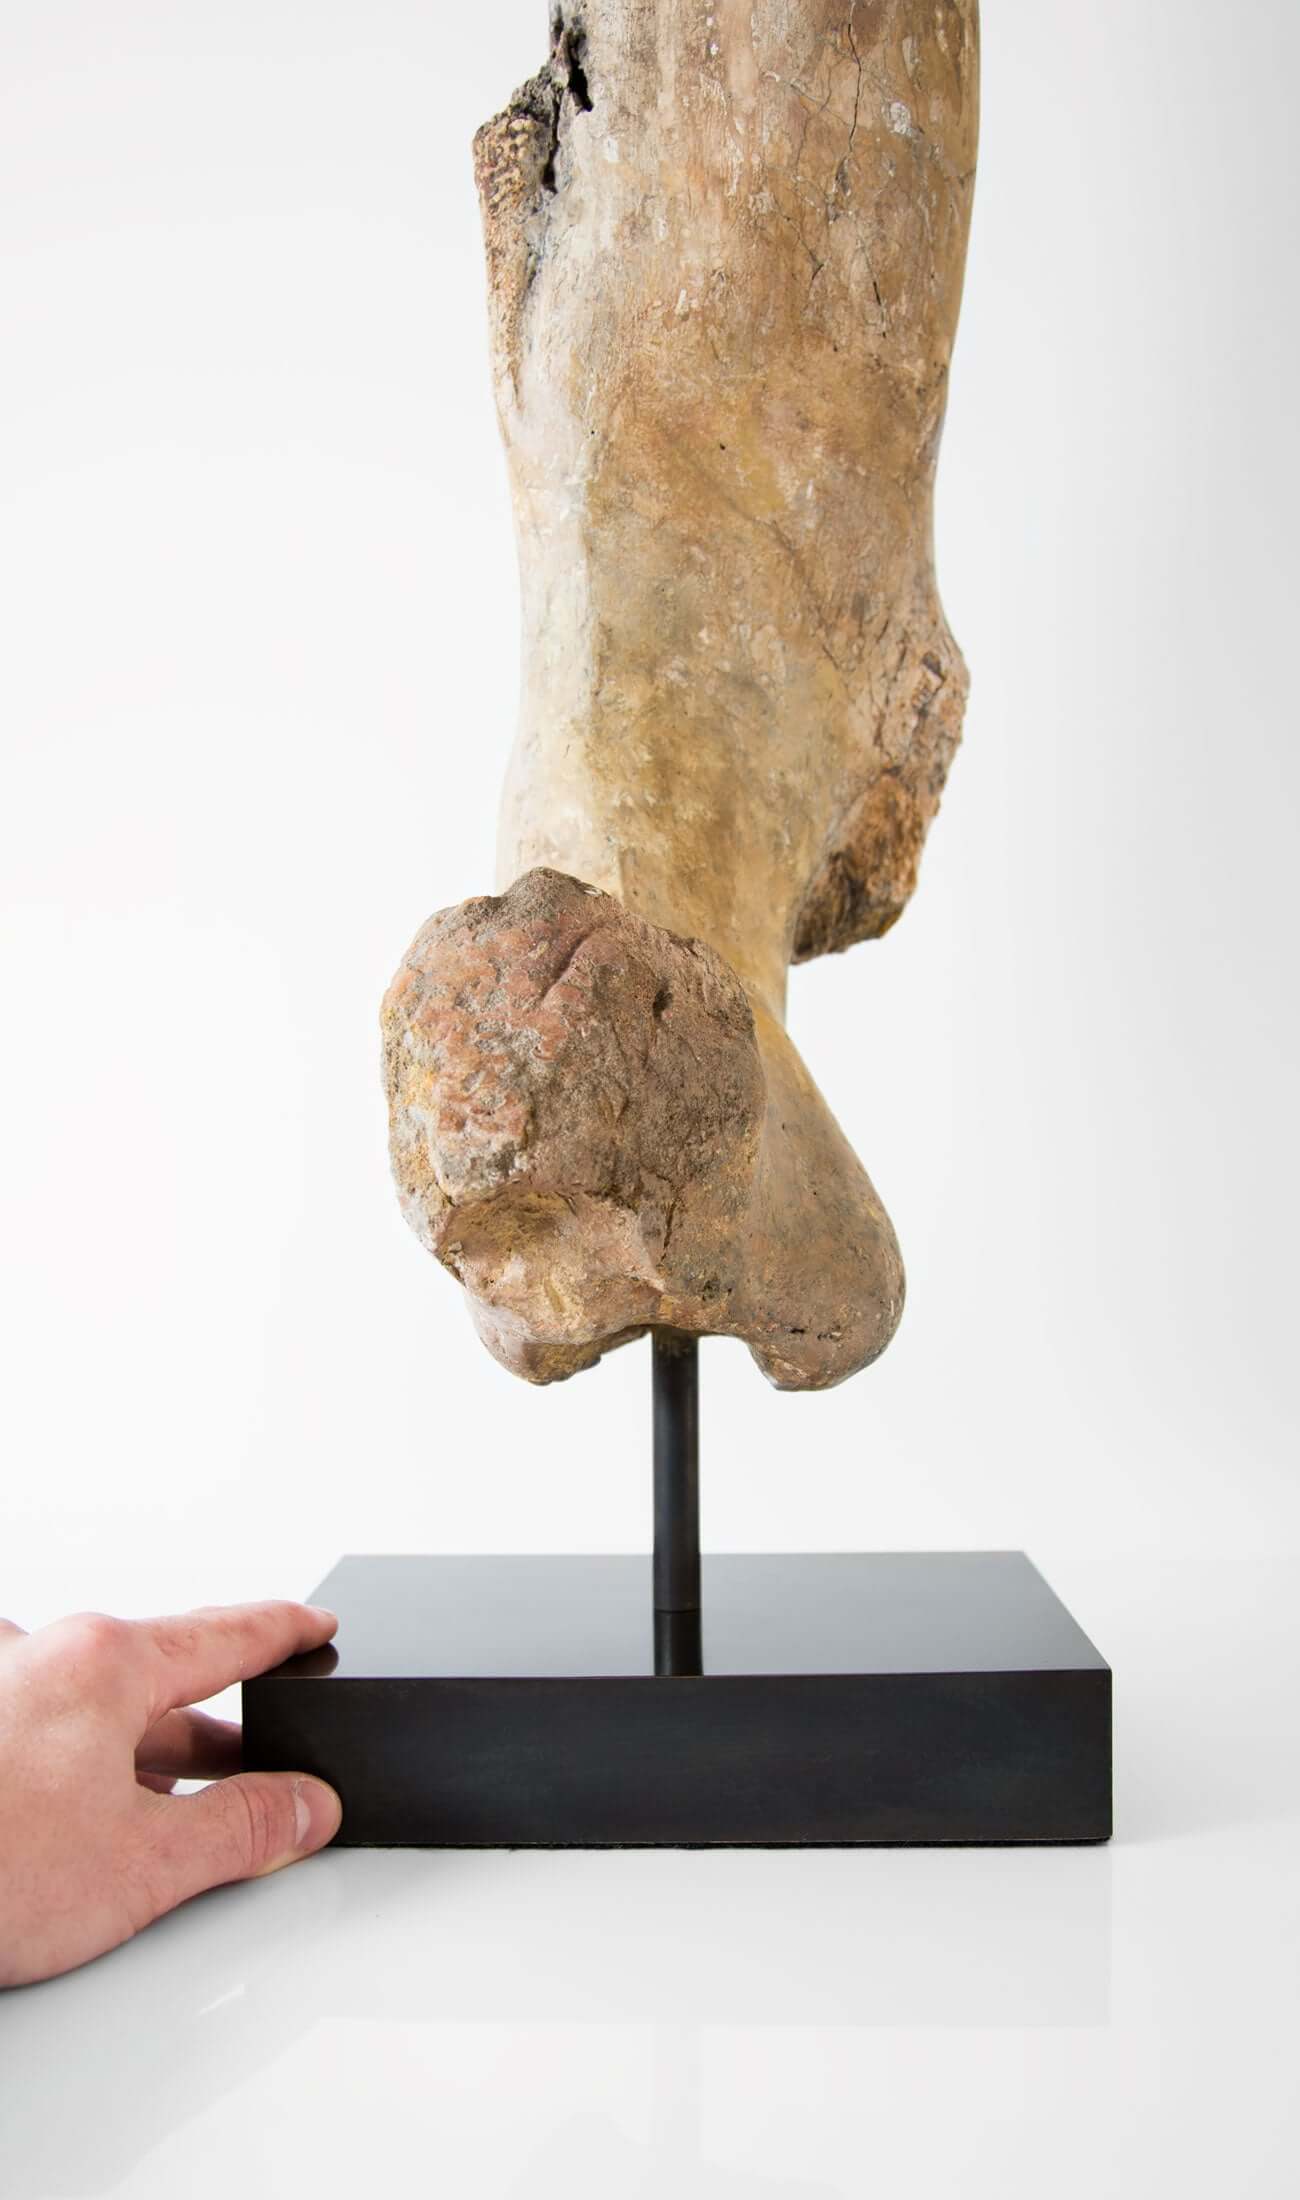 Scientifically important theropod dinosaur fossil femur bone for sale measuring 685mm at THE FOSSIL STORE